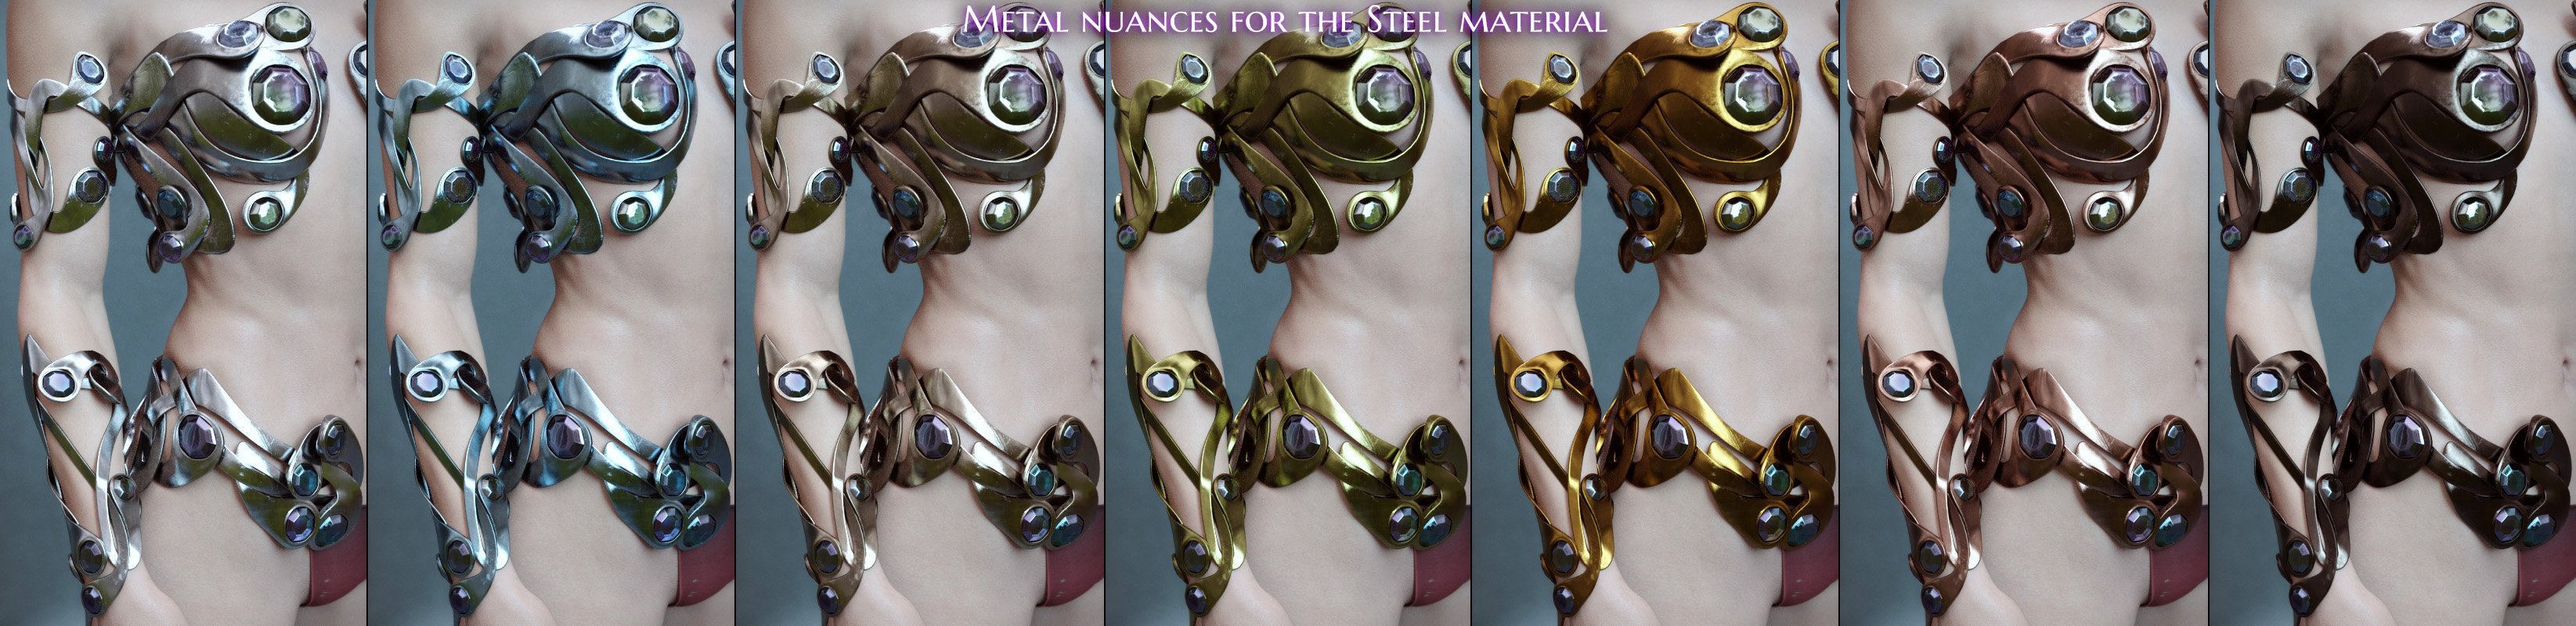 Enchanting Ornaments for Genesis 8 and 8.1 Females by: Aeon Soul, 3D Models by Daz 3D